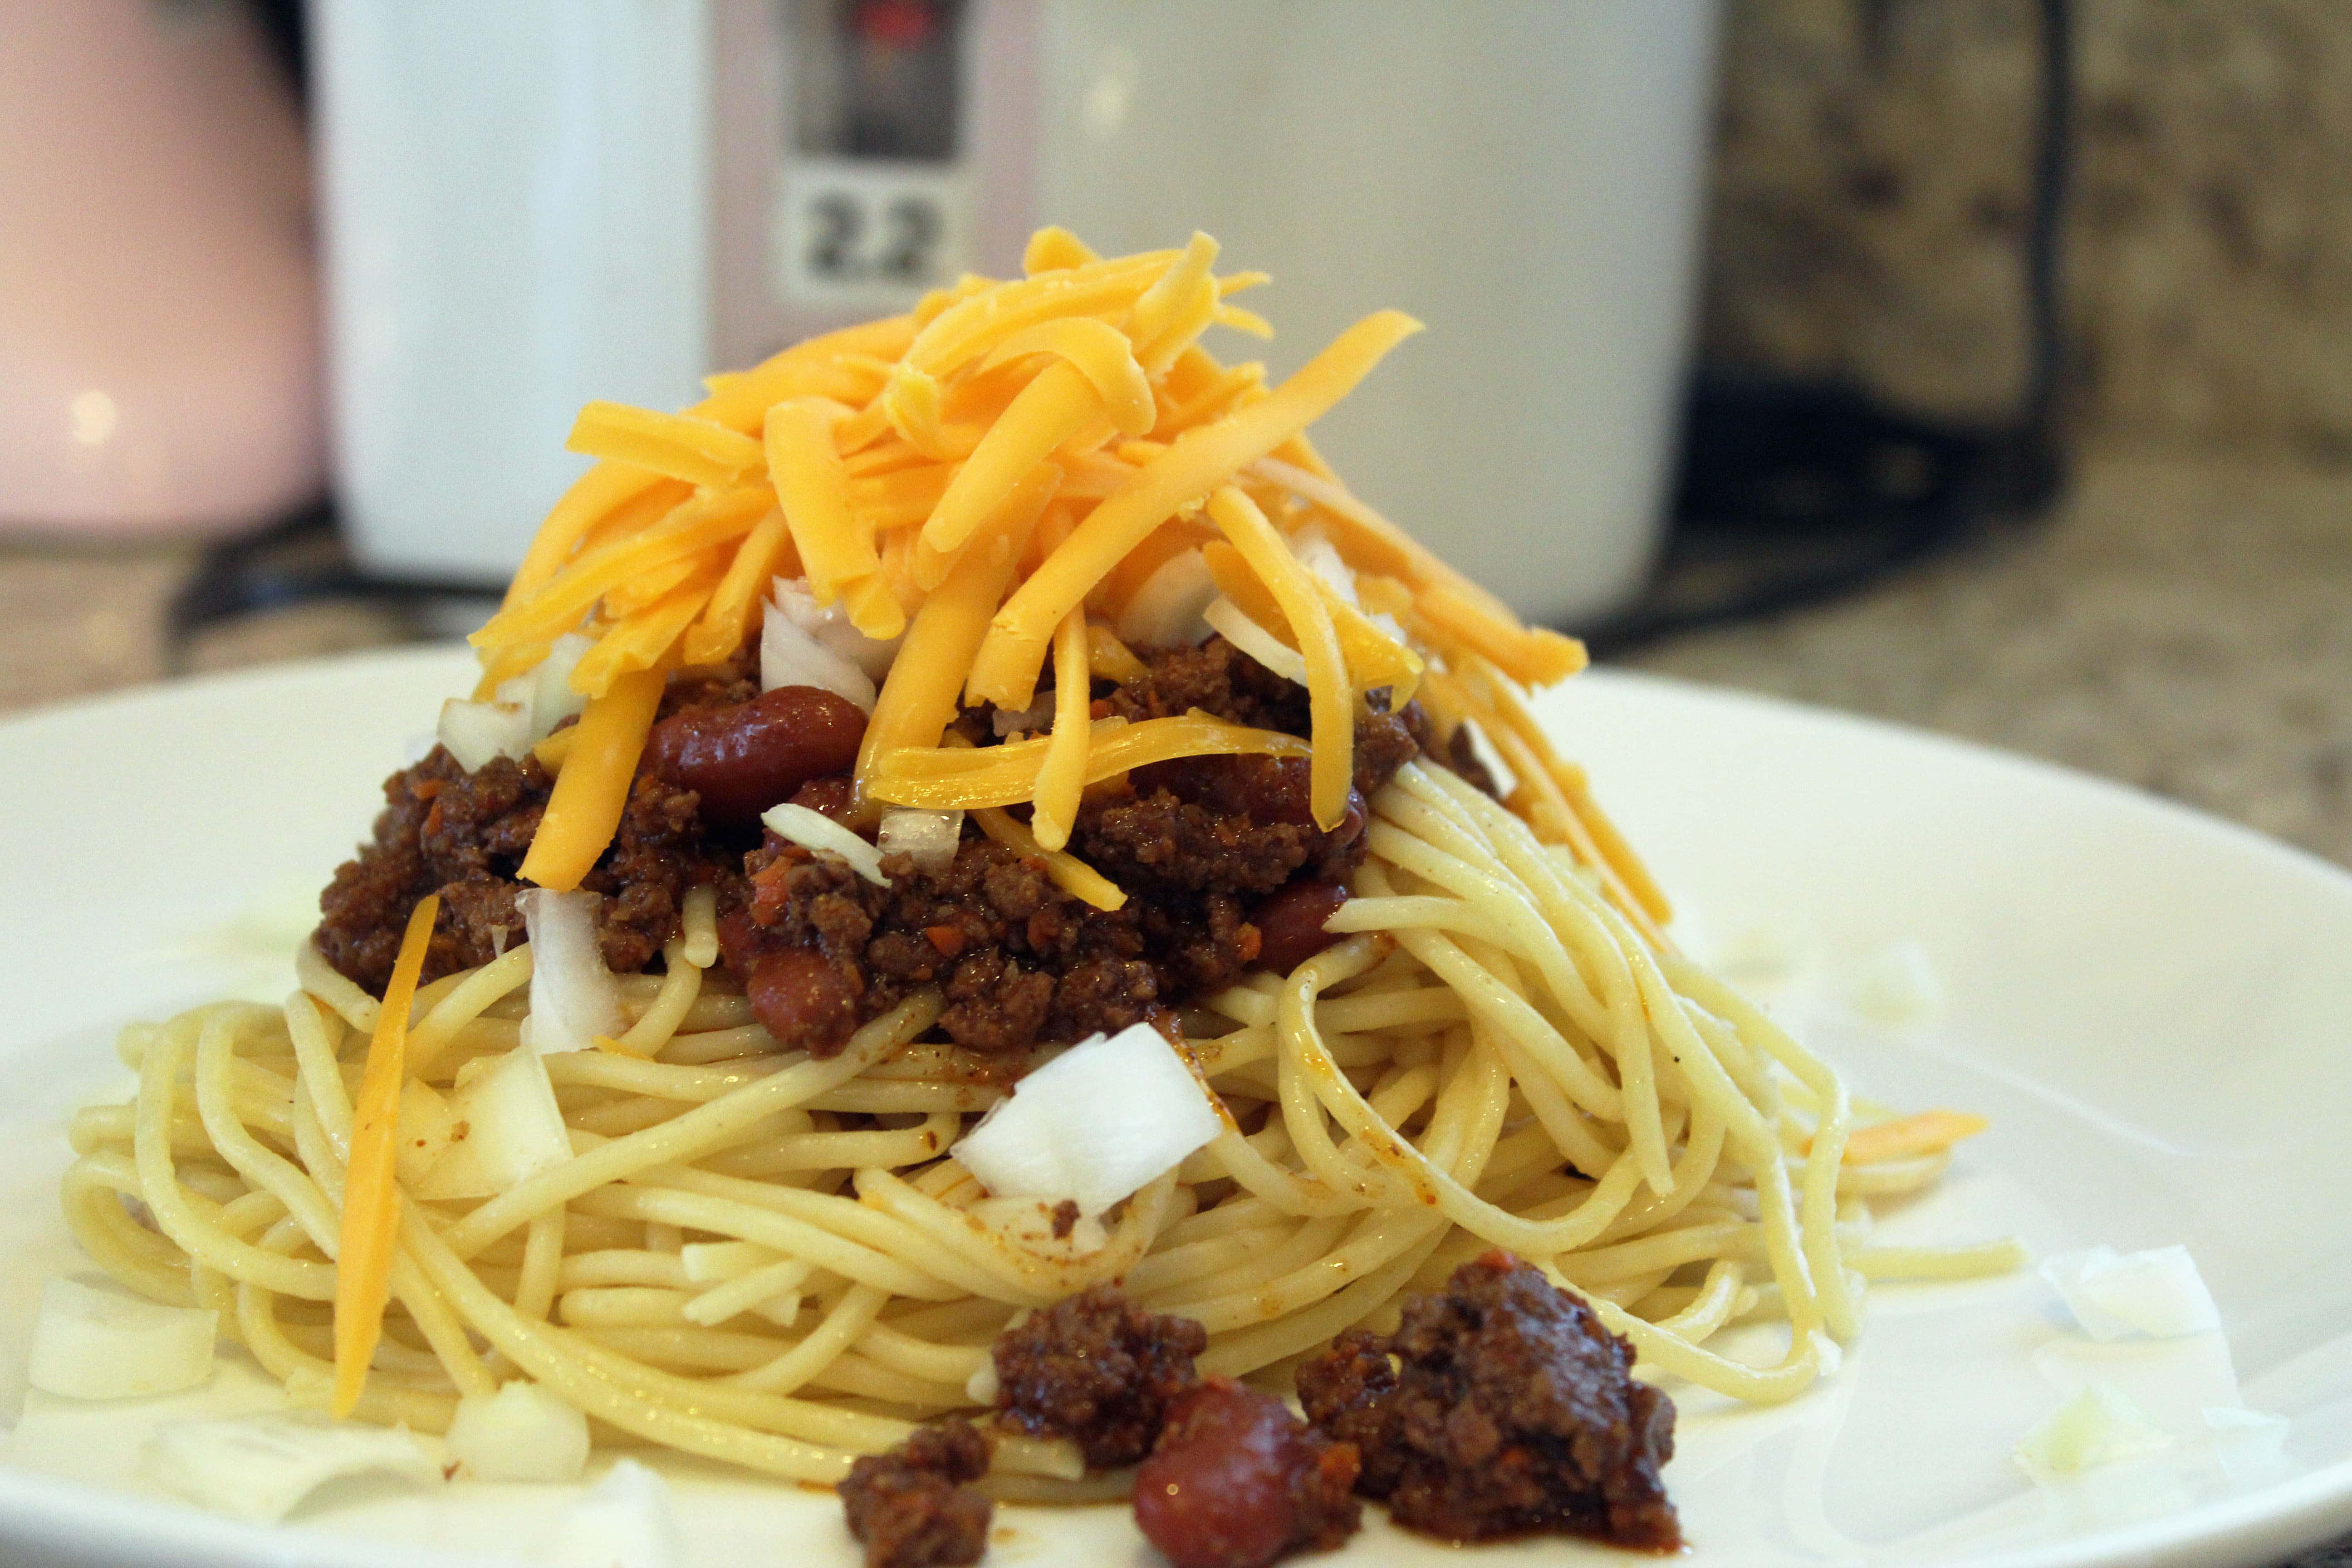 Spaghetti topped with chili and cheese